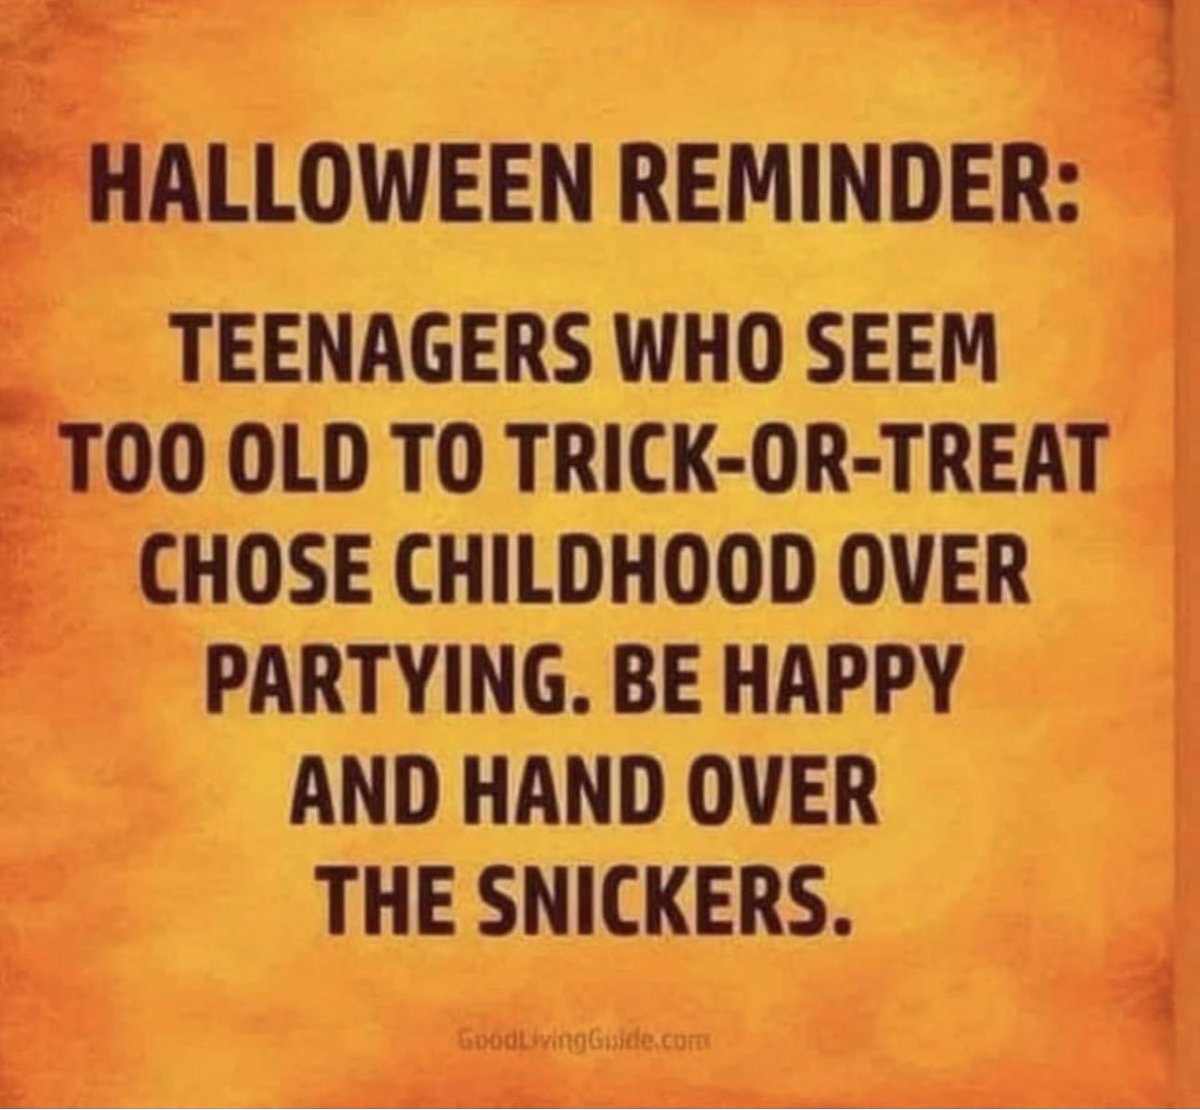 I never thought of it this way…. Better get more candy.